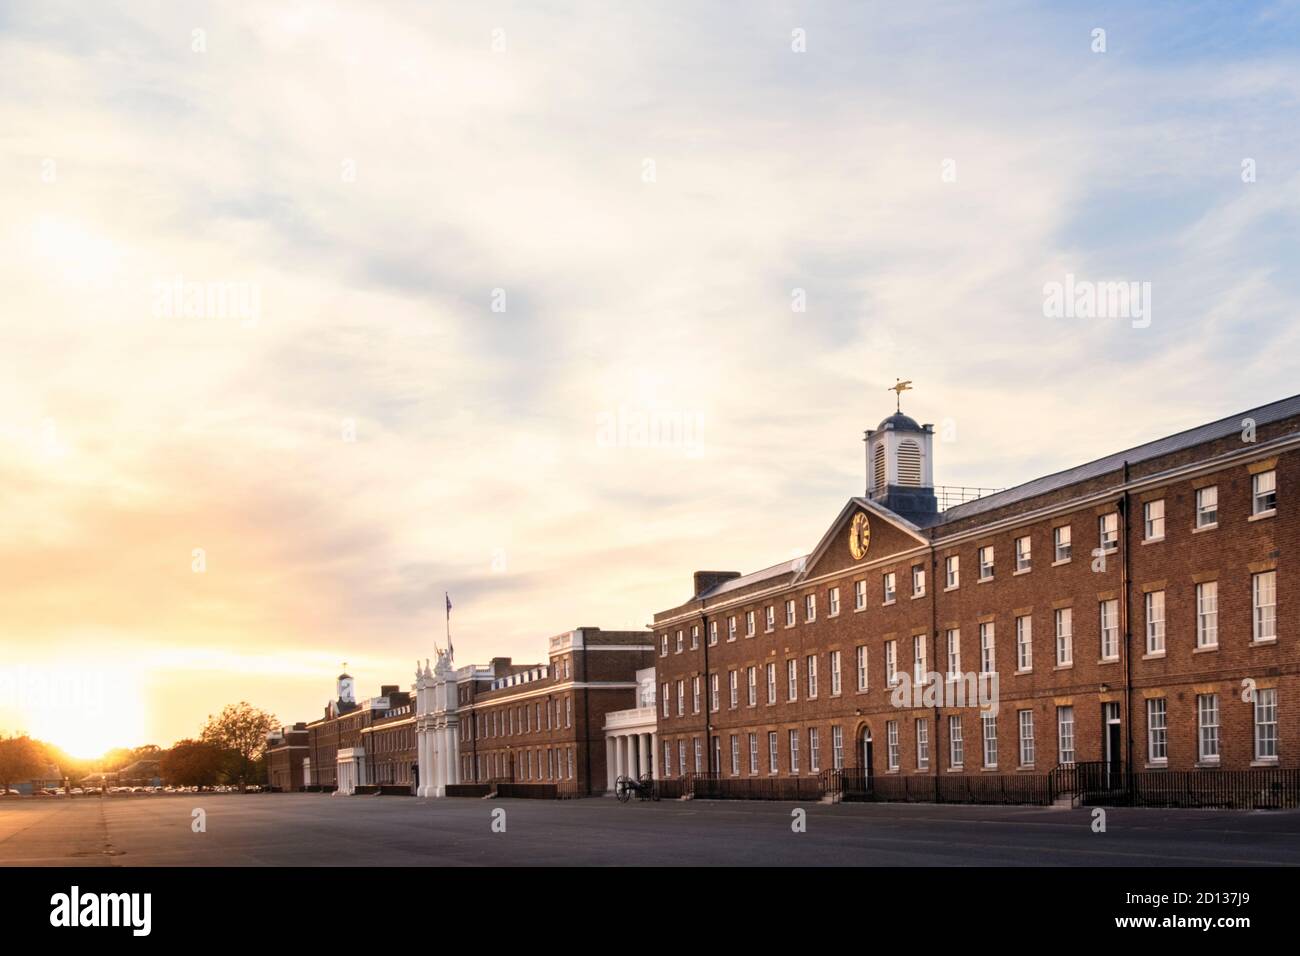 Royal Artillery barracks, former HQ of the Royal Horse Artillery, home to First Battalion Royal Anglian Regiment, set for closure, Woolwich, London Stock Photo